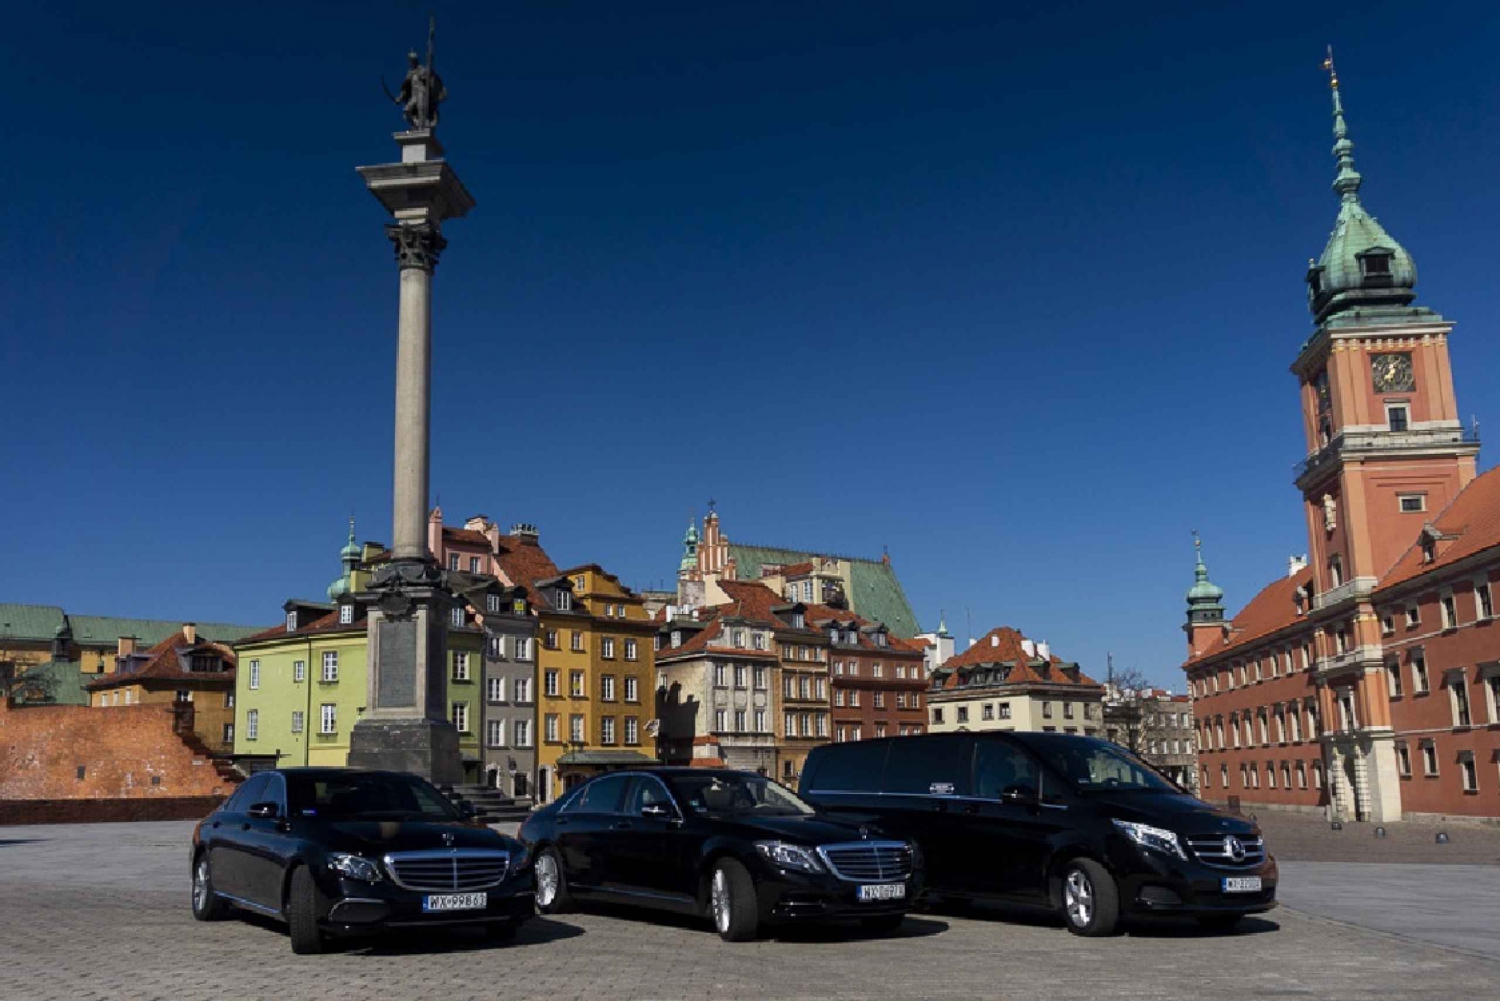 Warsaw: History and Modernity City Tour by Private Car